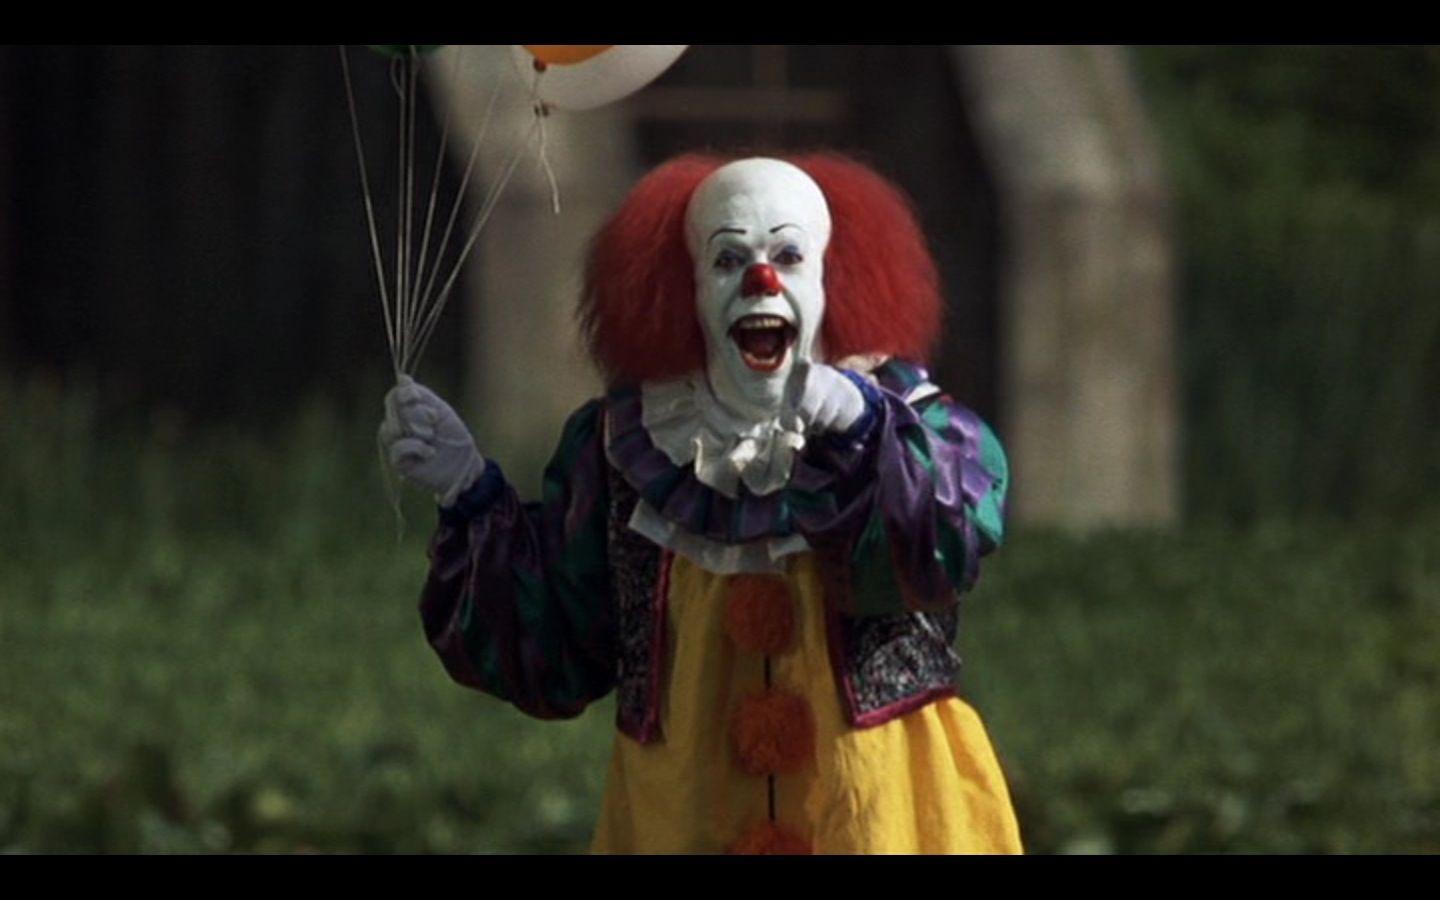 image For > It The Clown